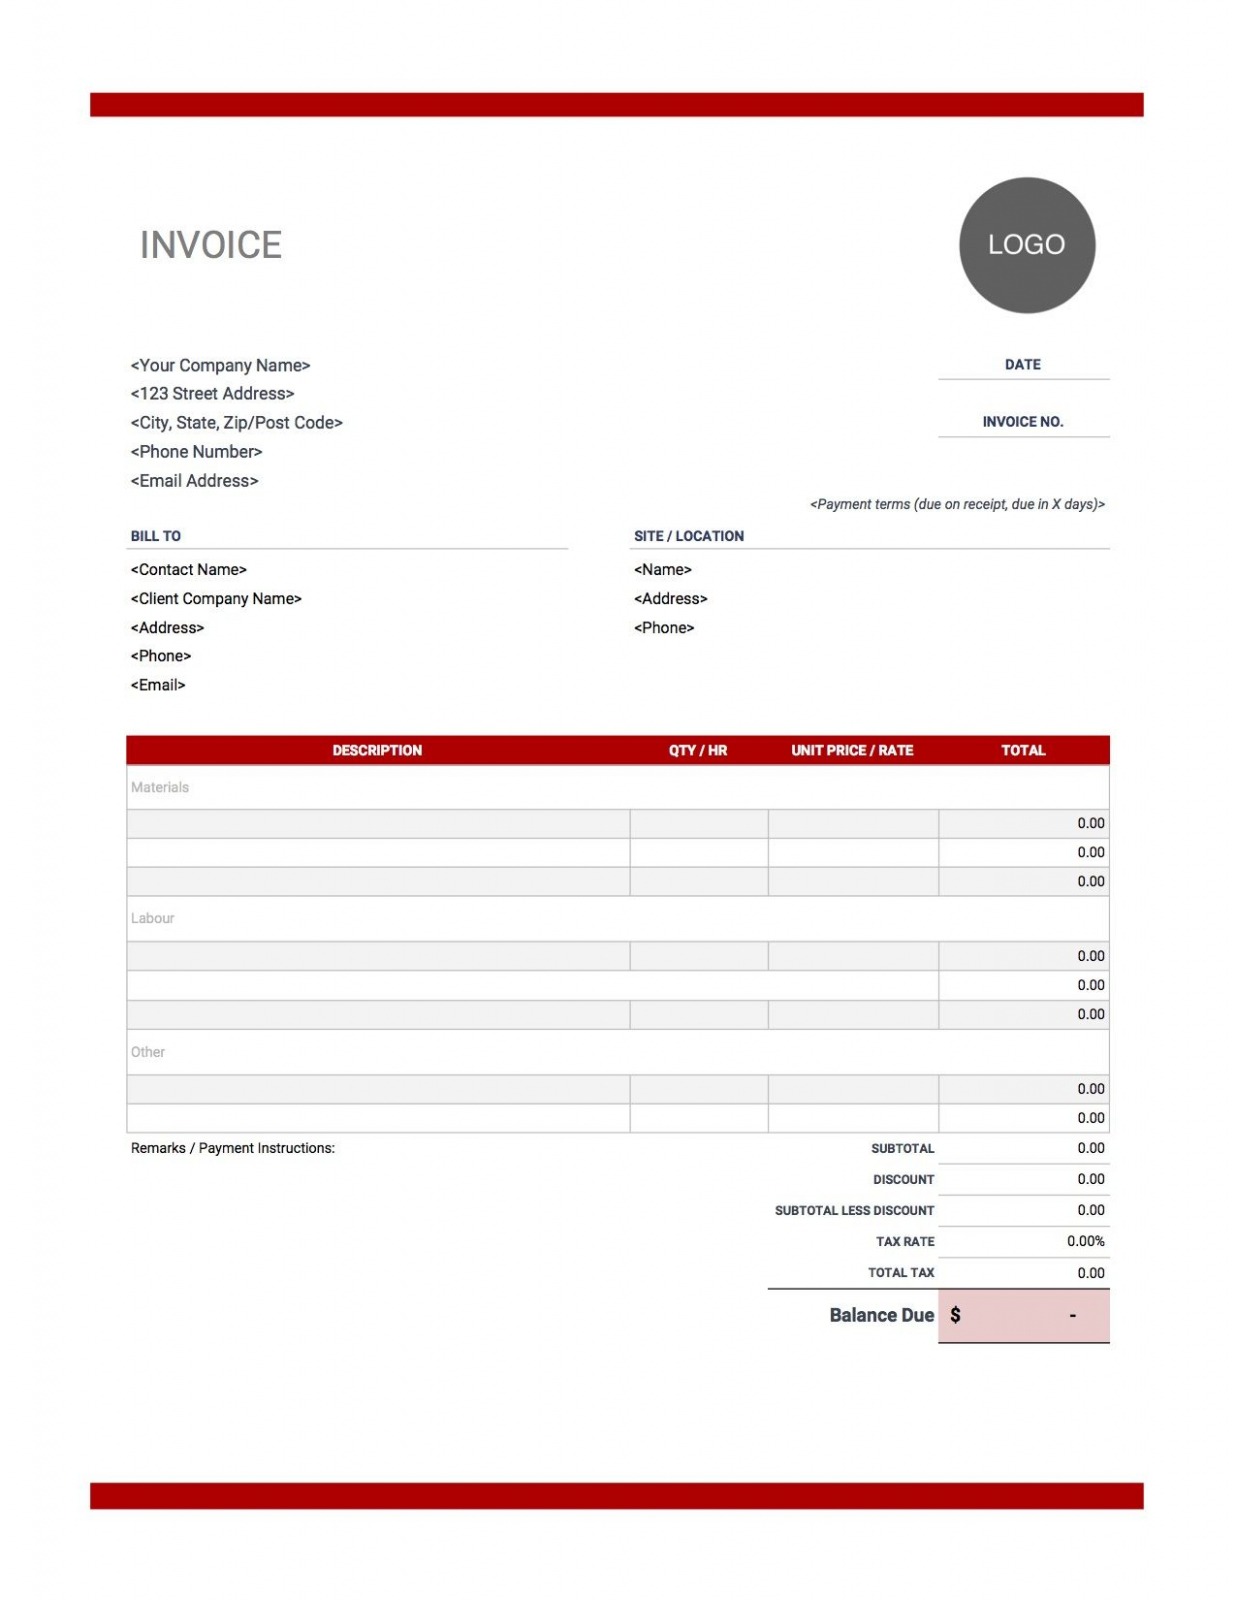 Sample Wage Invoice Template Doc